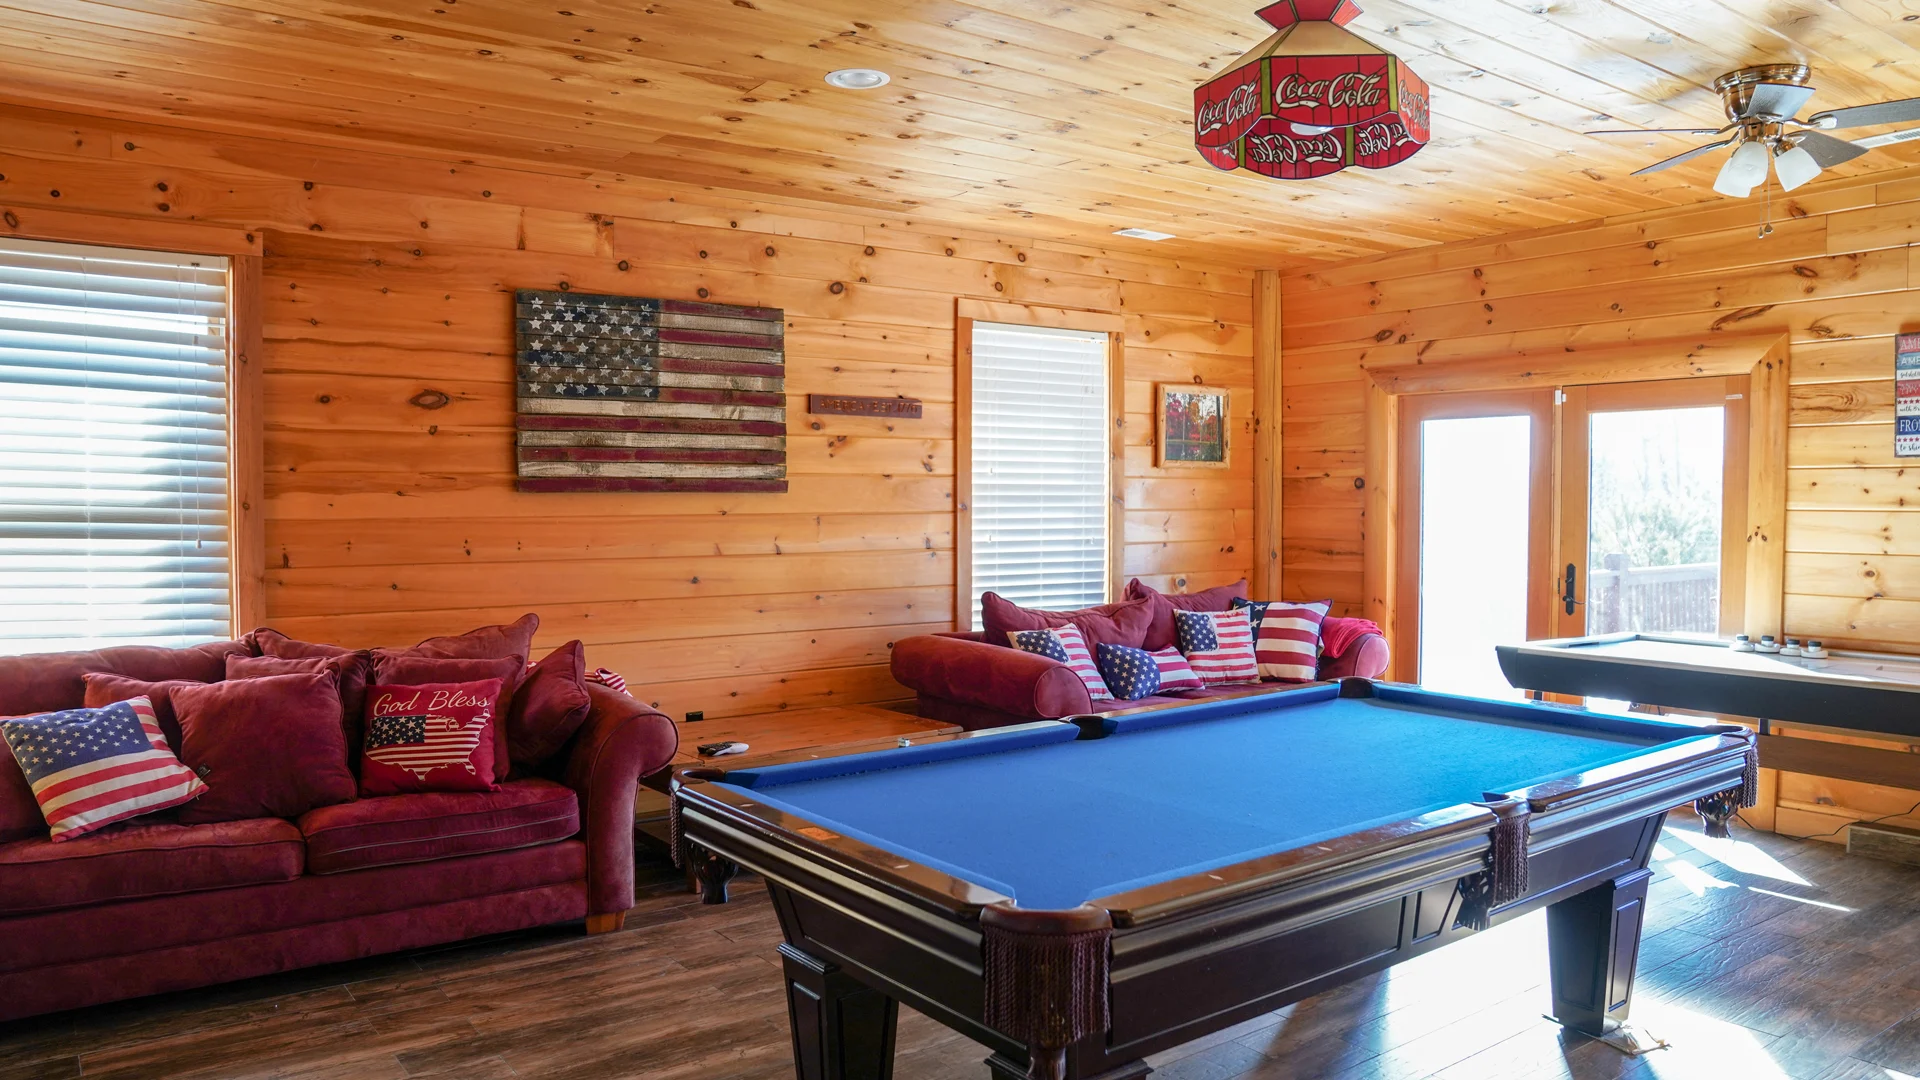 Our North Carolina cabins offer fun amenities you won't find with other rental options.